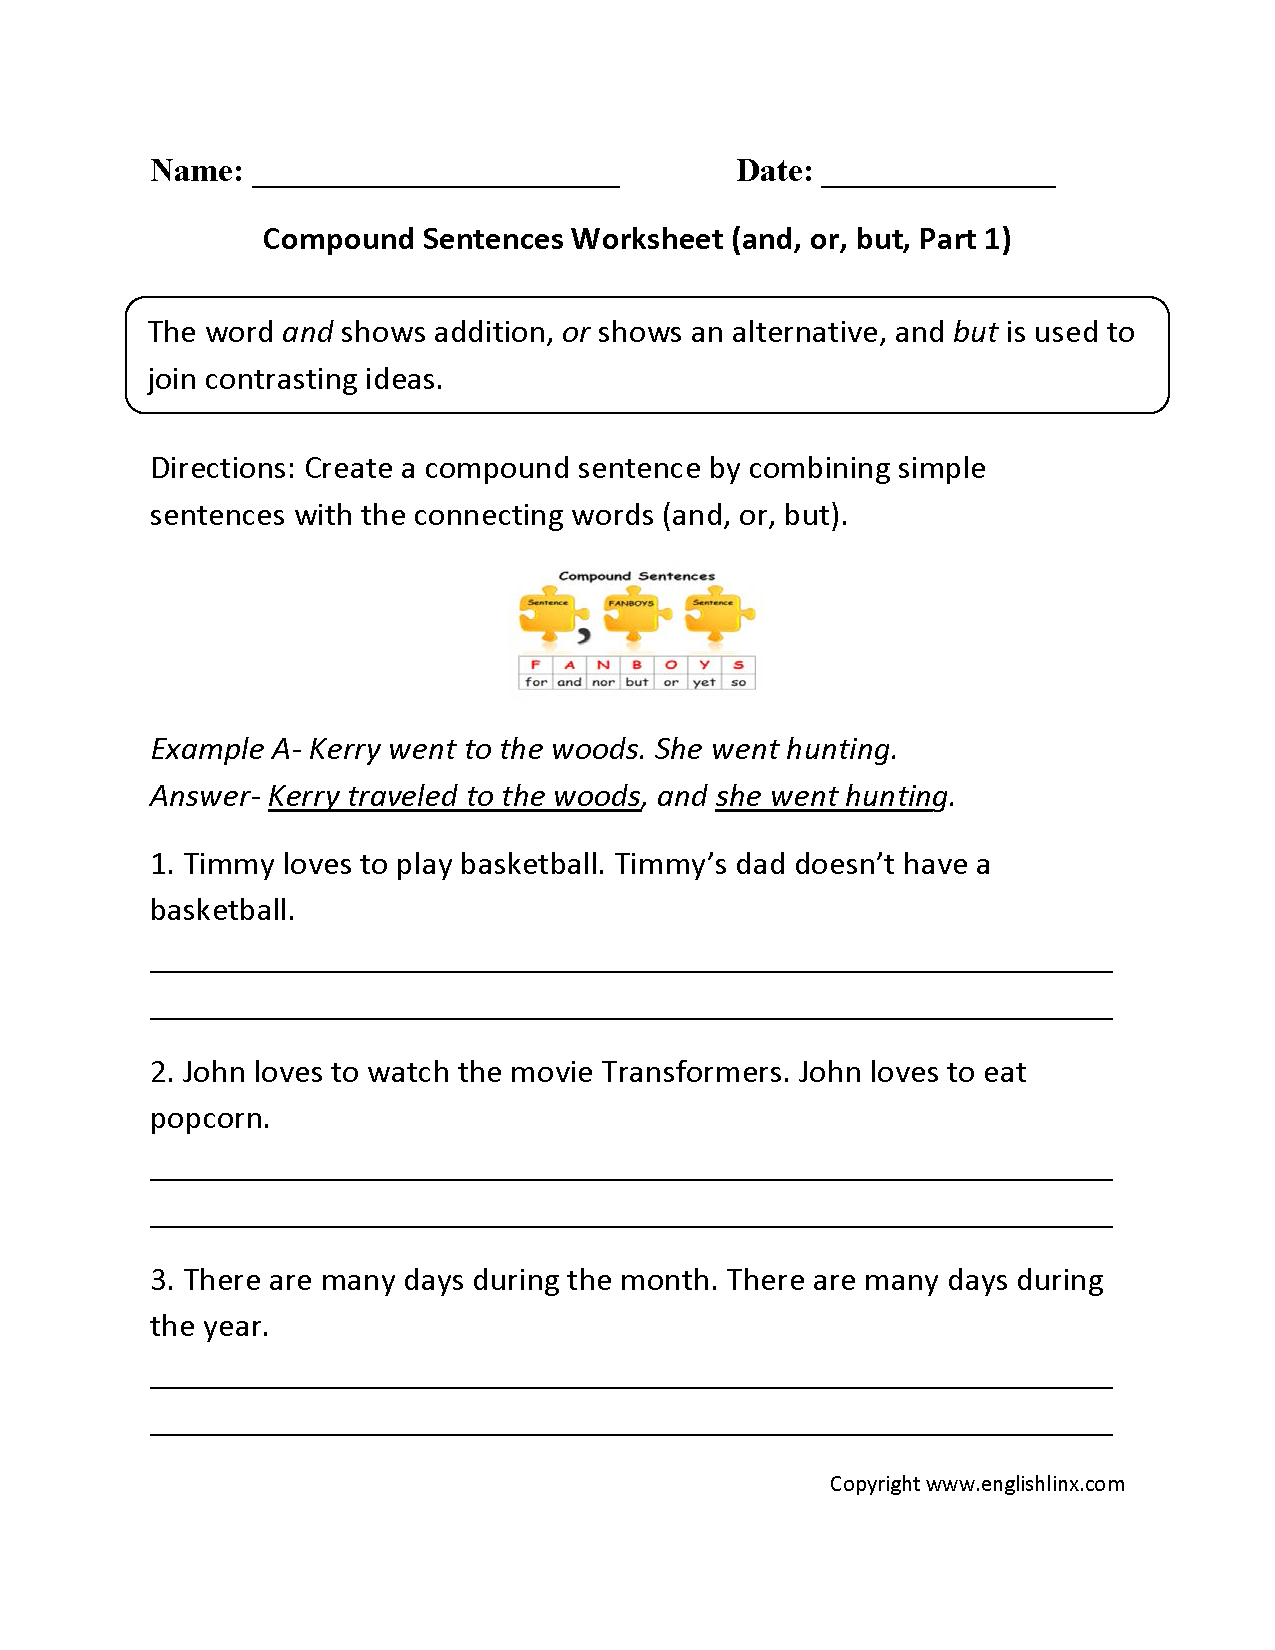 and,or,but Compound Sentences Worksheet